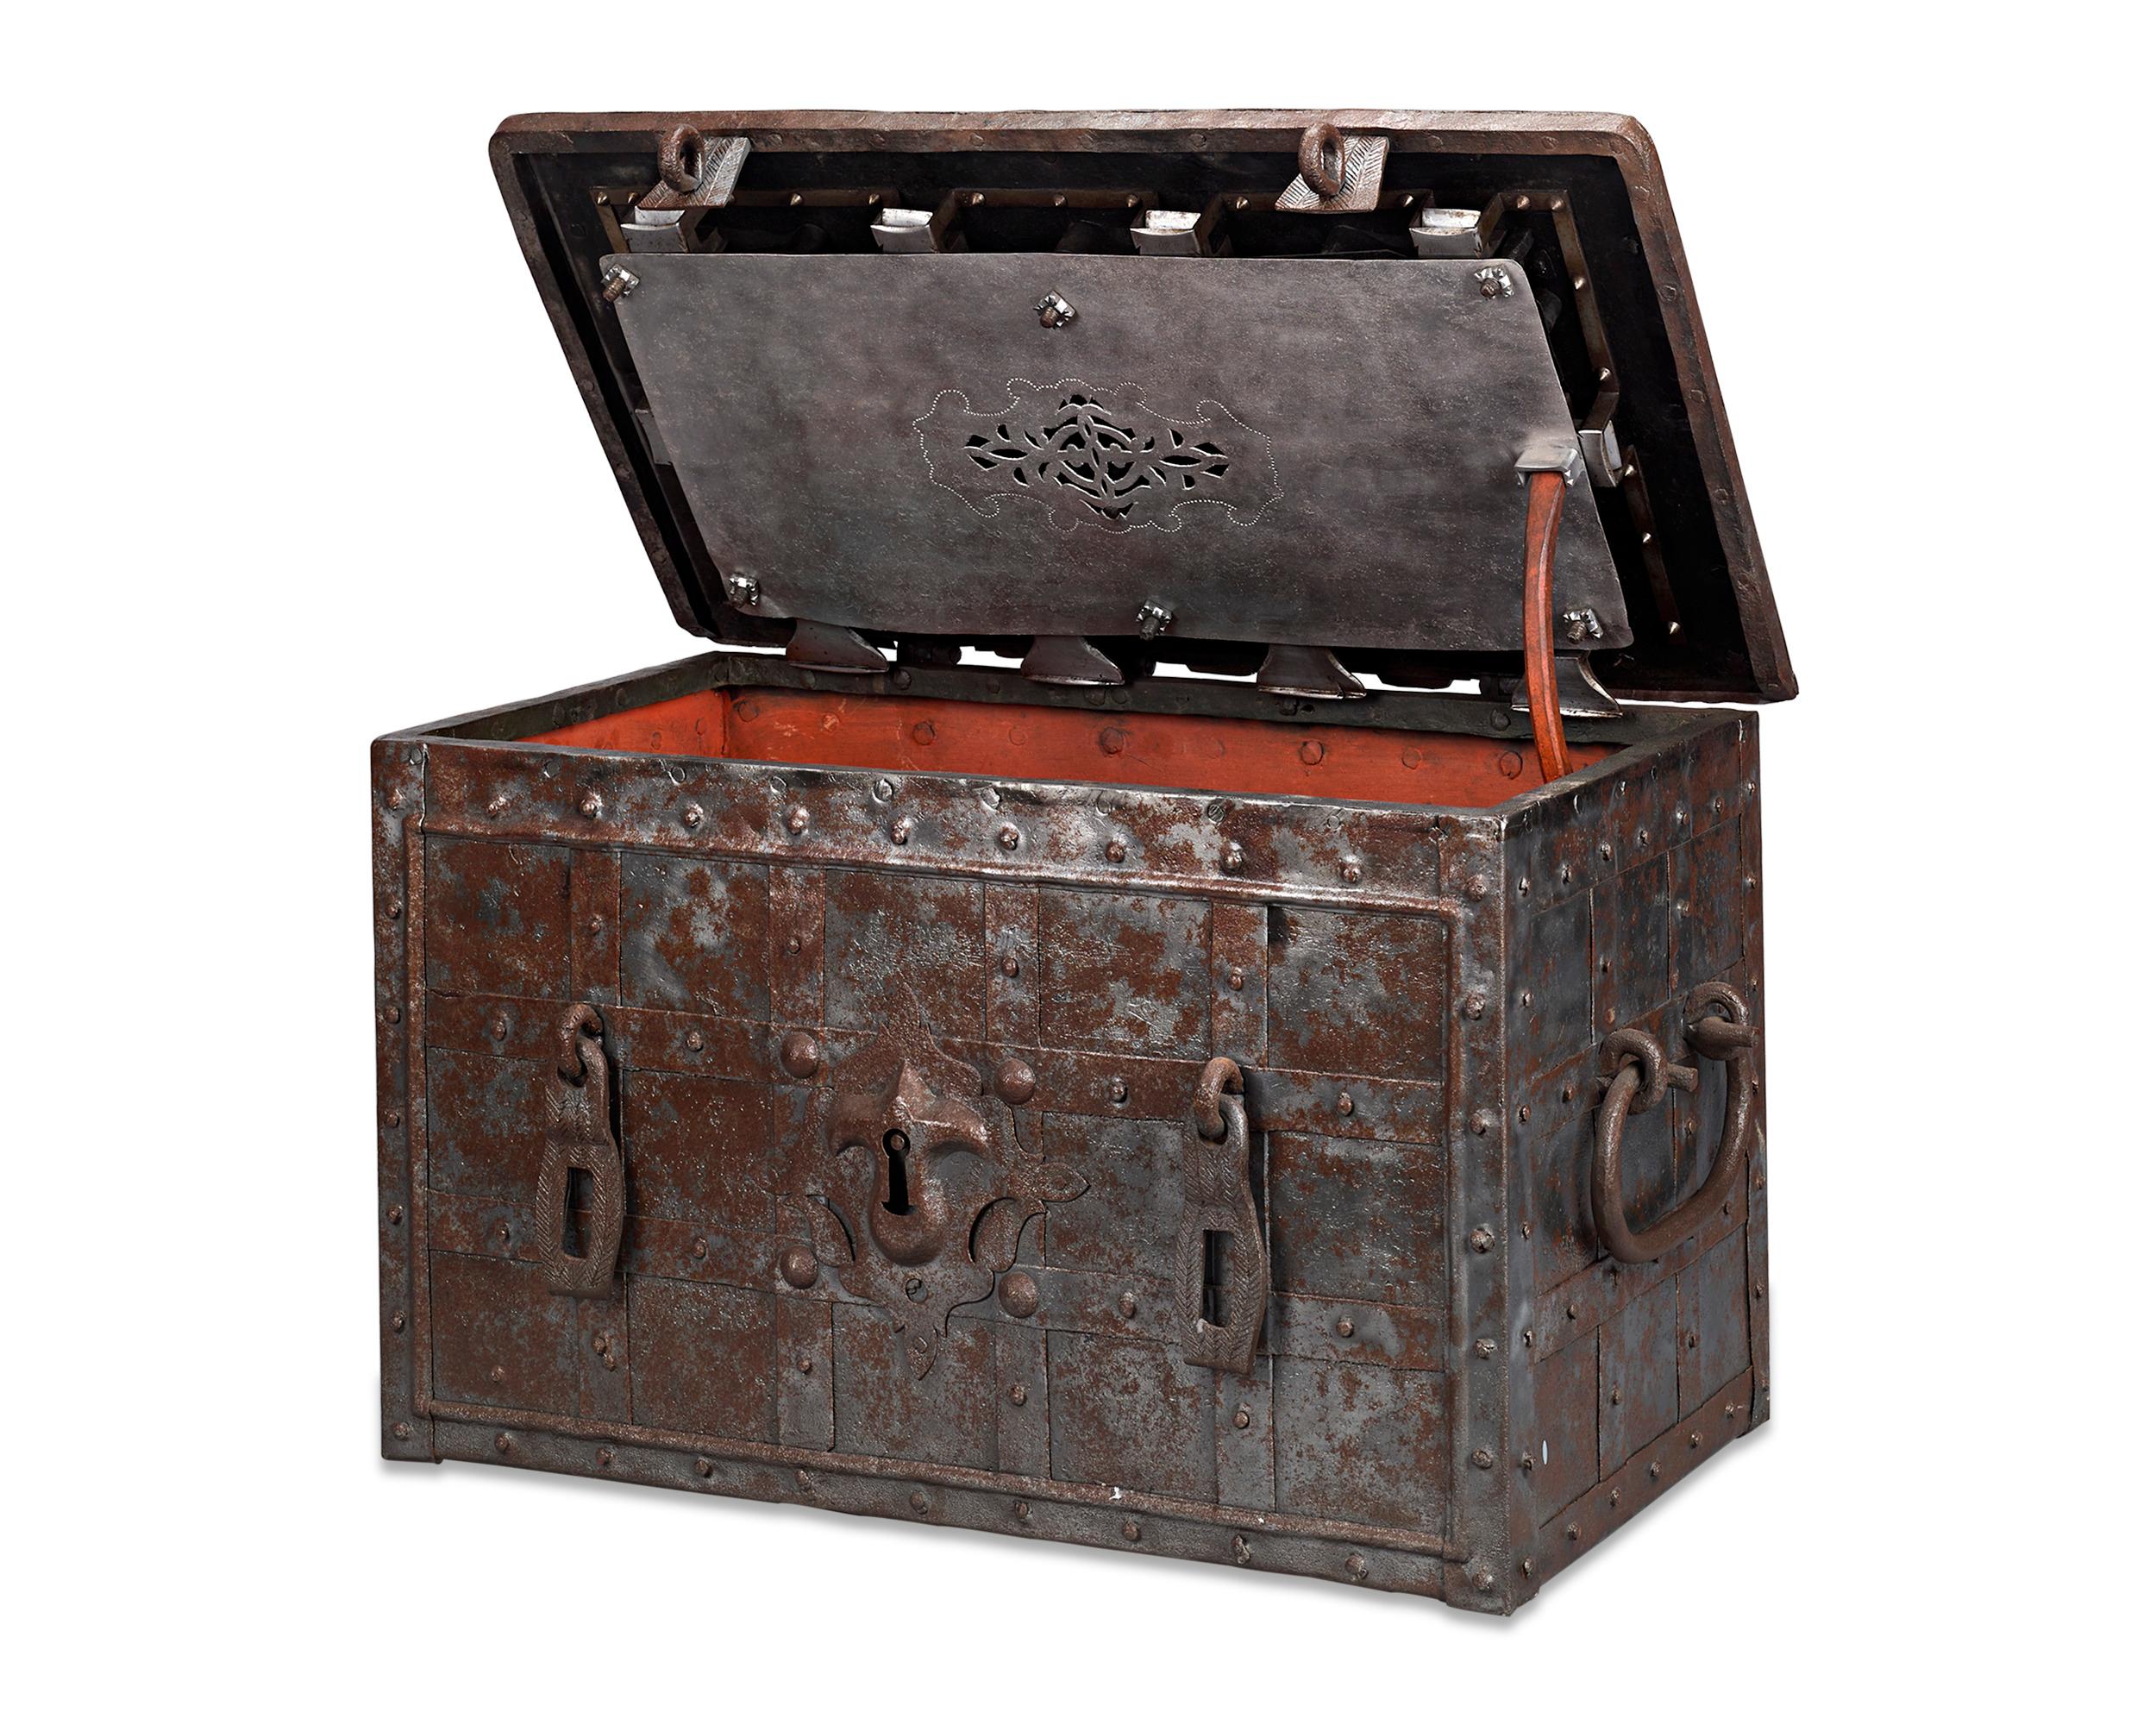 This rare German Baroque Renaissance strongbox is crafted of reinforced wrought iron and is designed to be impenetrable. Intended to secure one's most precious valuables, the strongbox, also known as an 